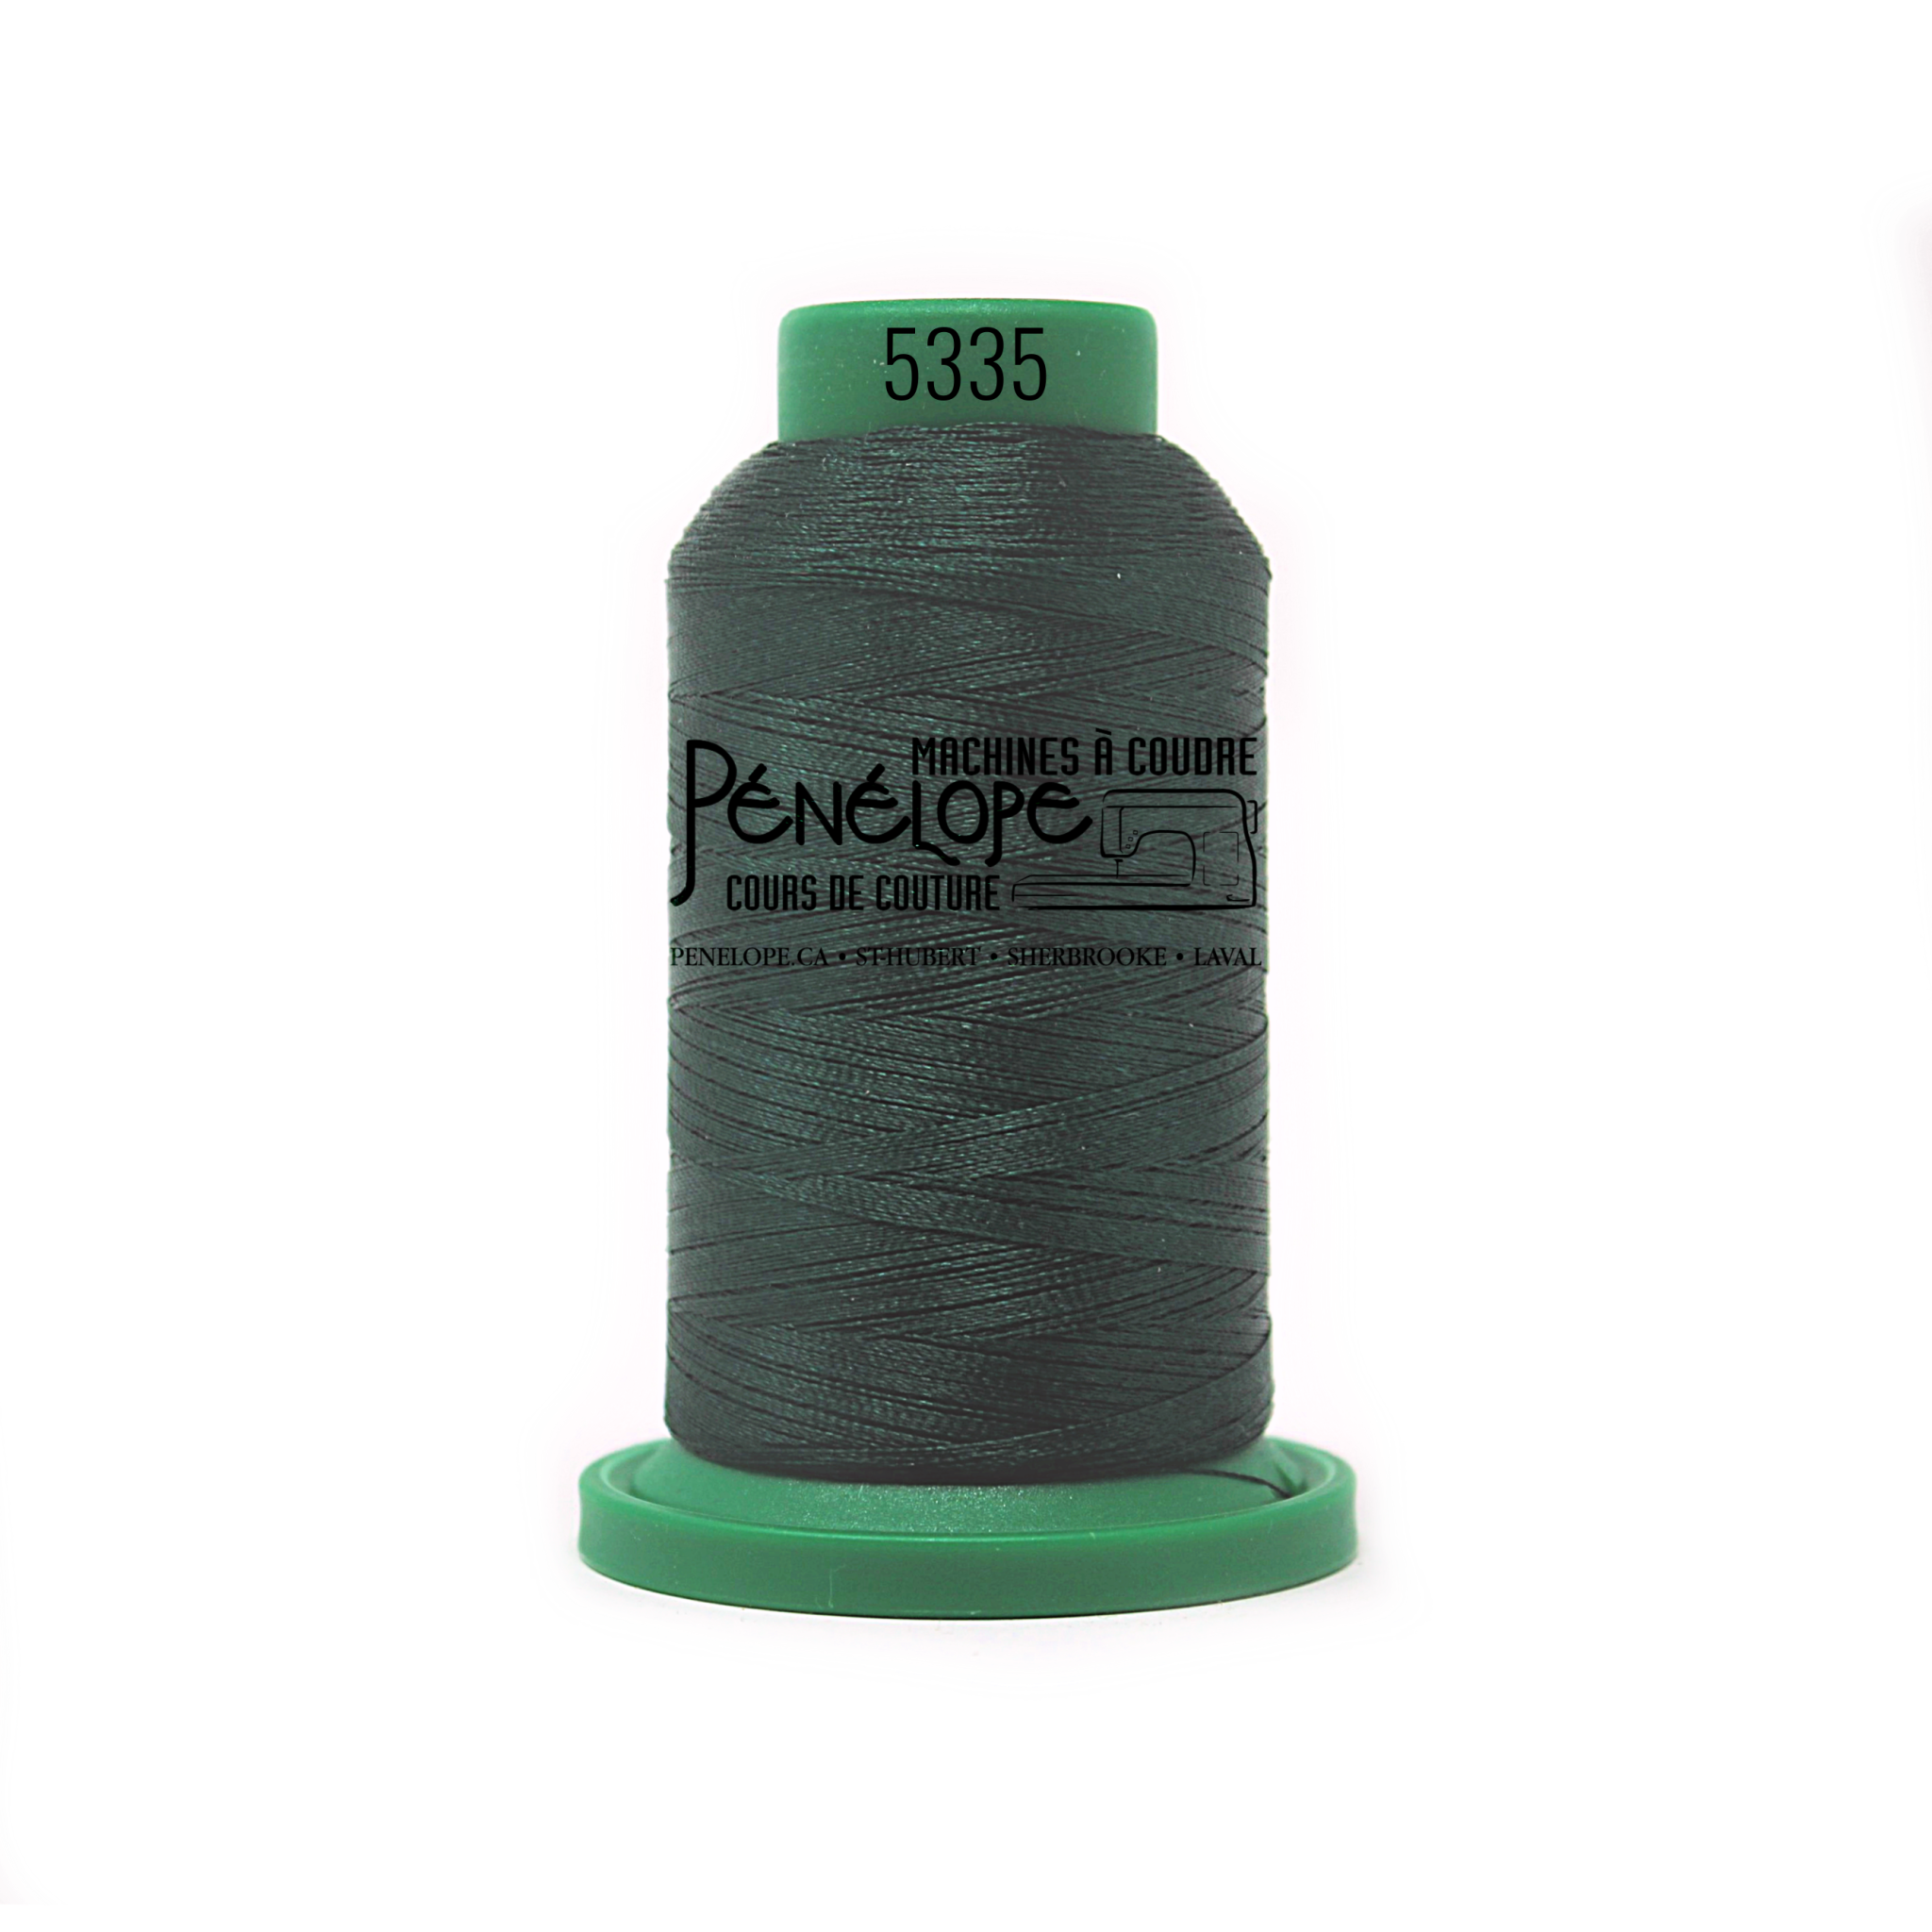 Isacord Isacord sewing and embroidery thread 5335